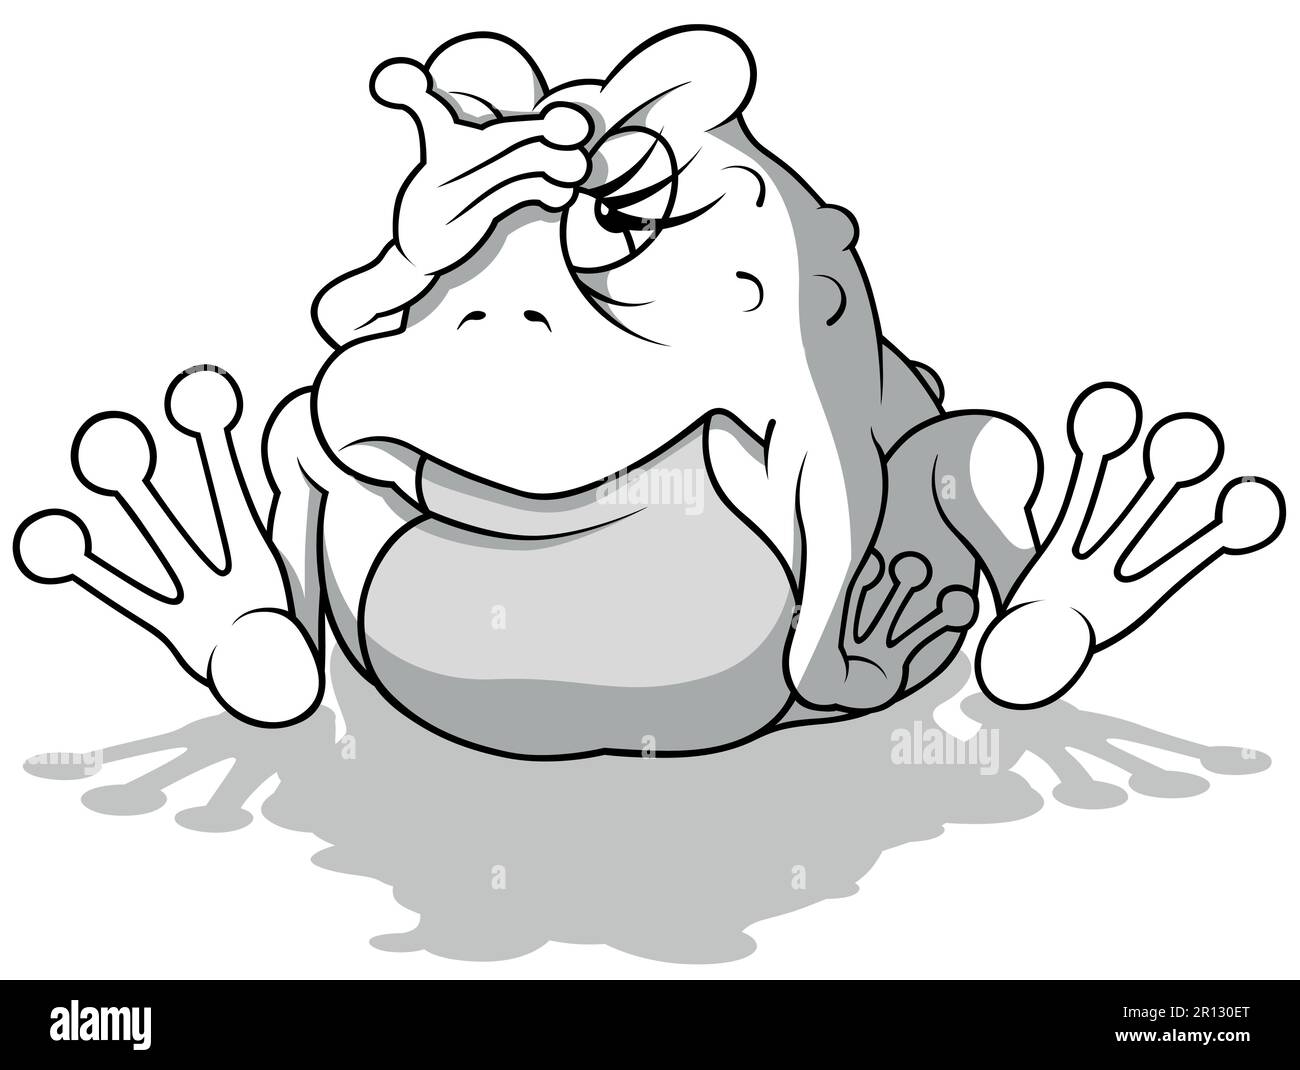 Drawing of a Sitting Frog Stock Vector